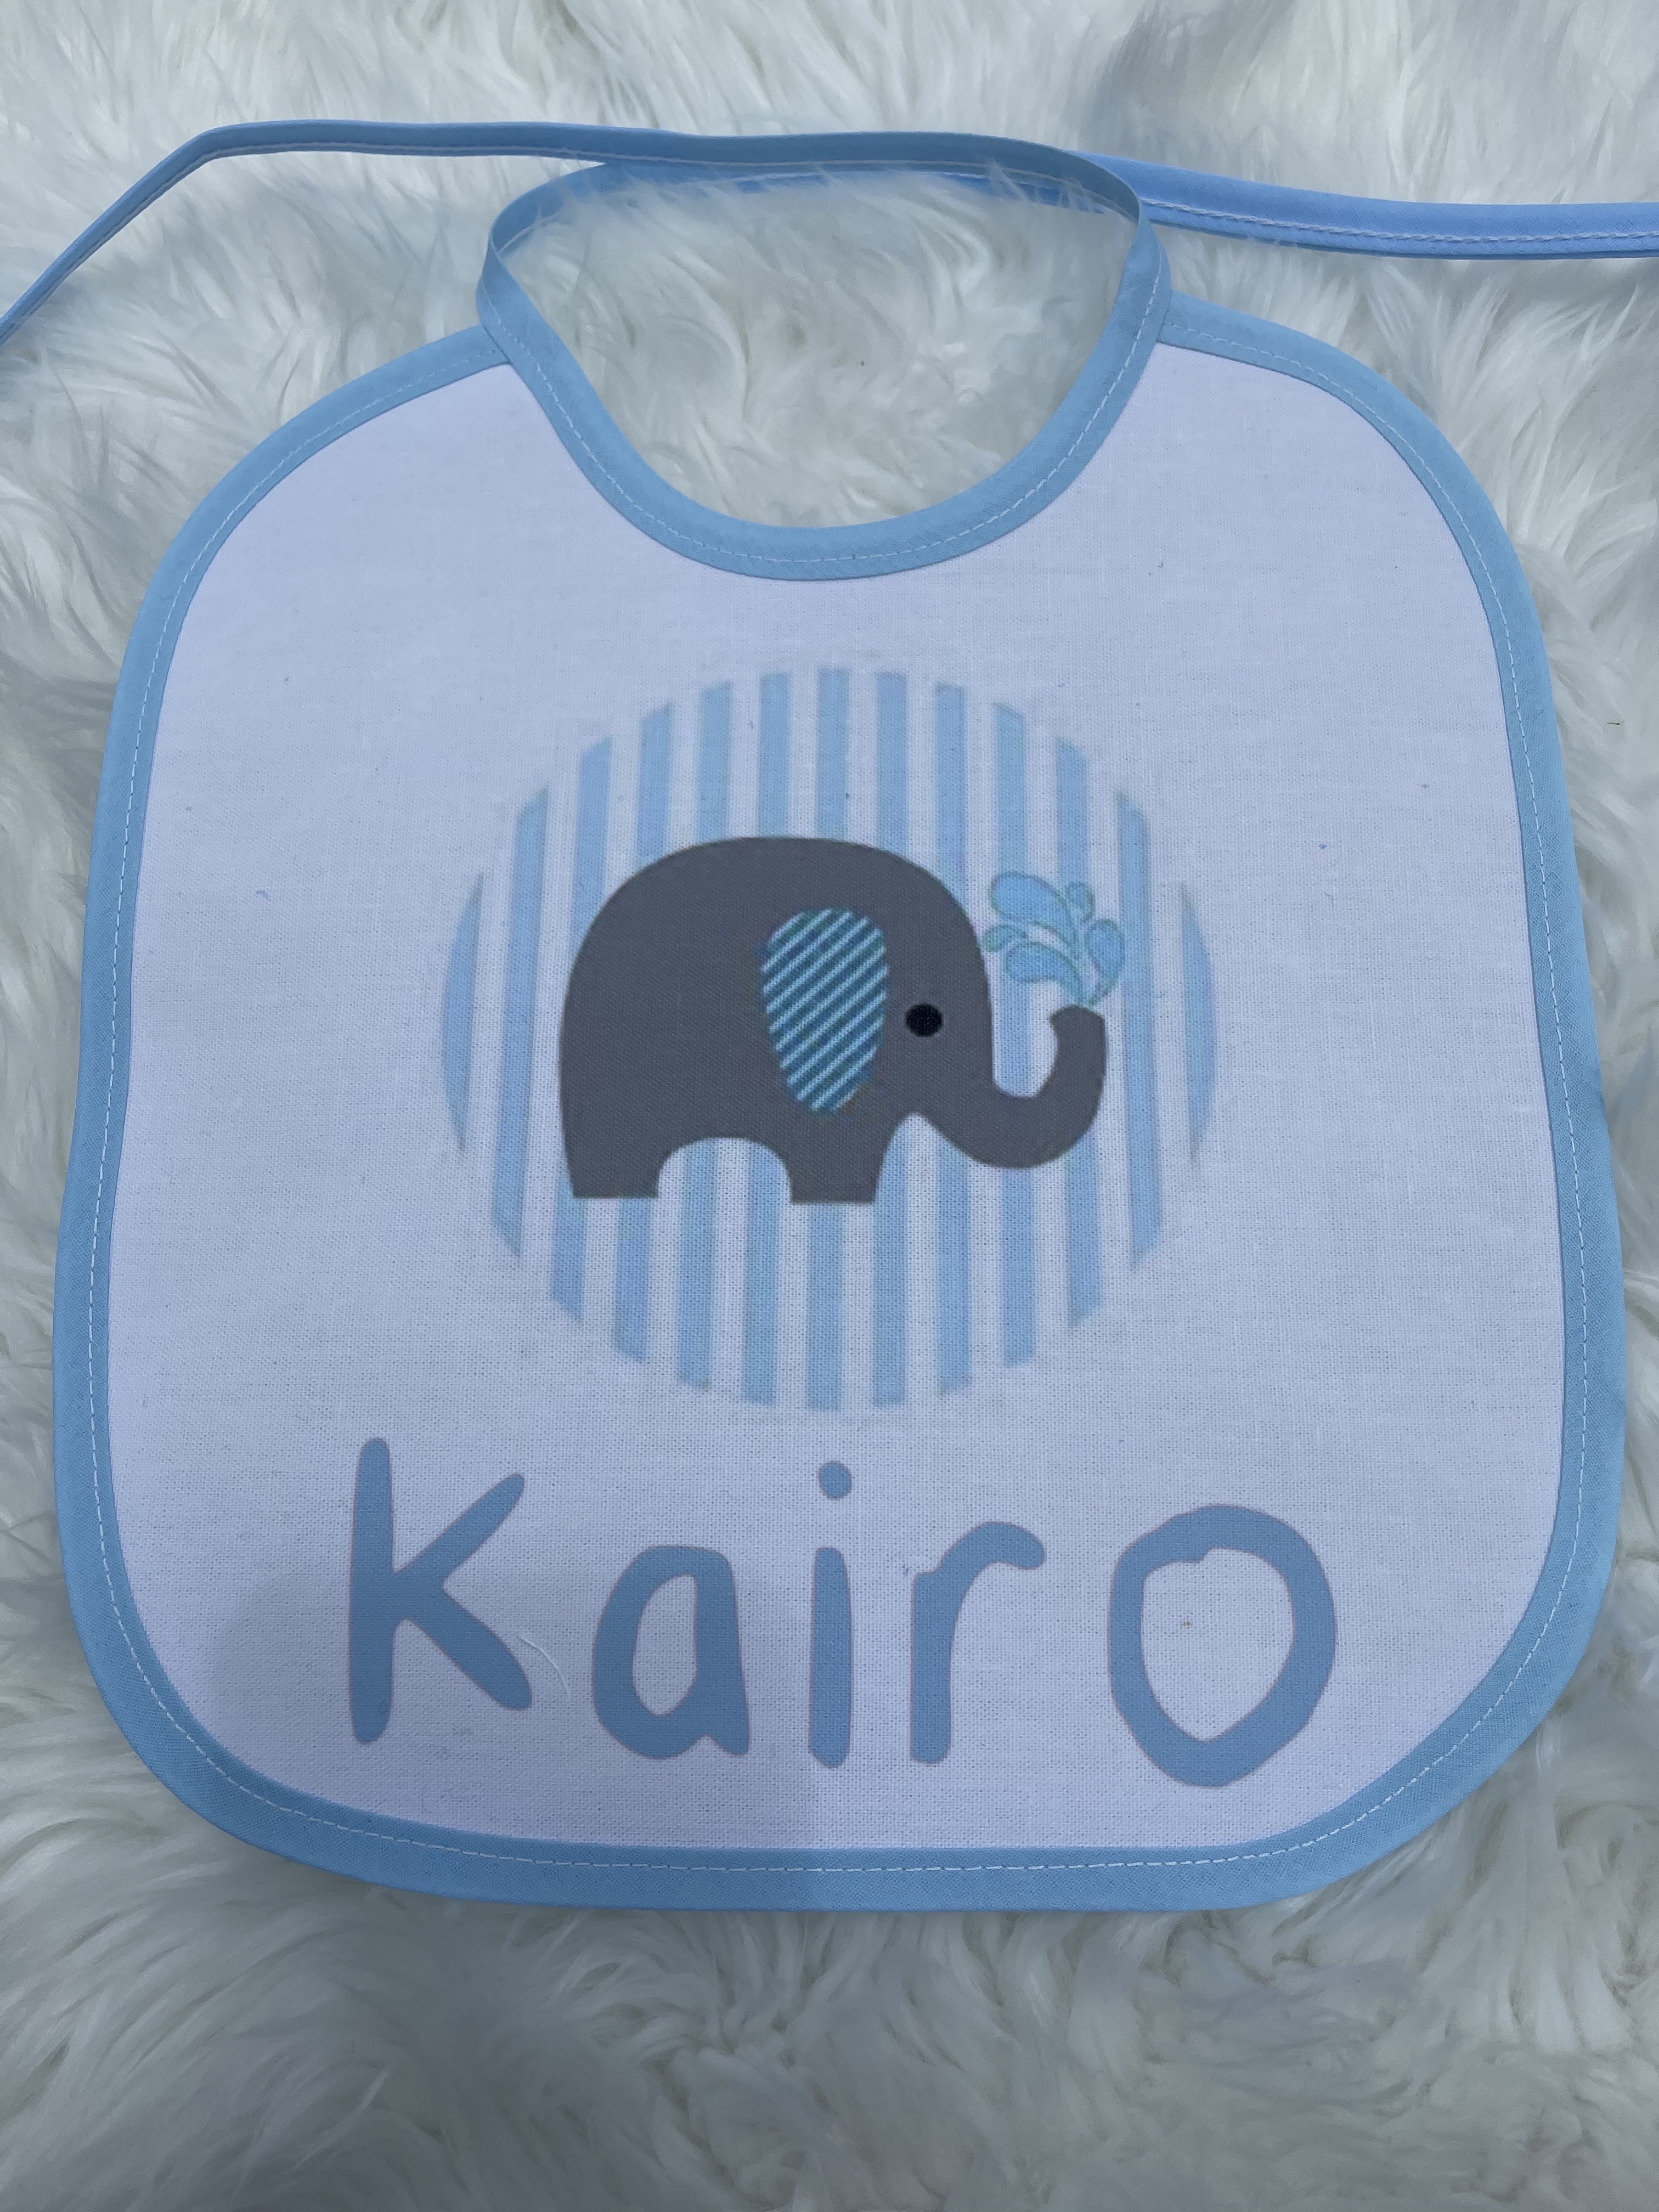 Baby Boy Bib made with sublimation printing